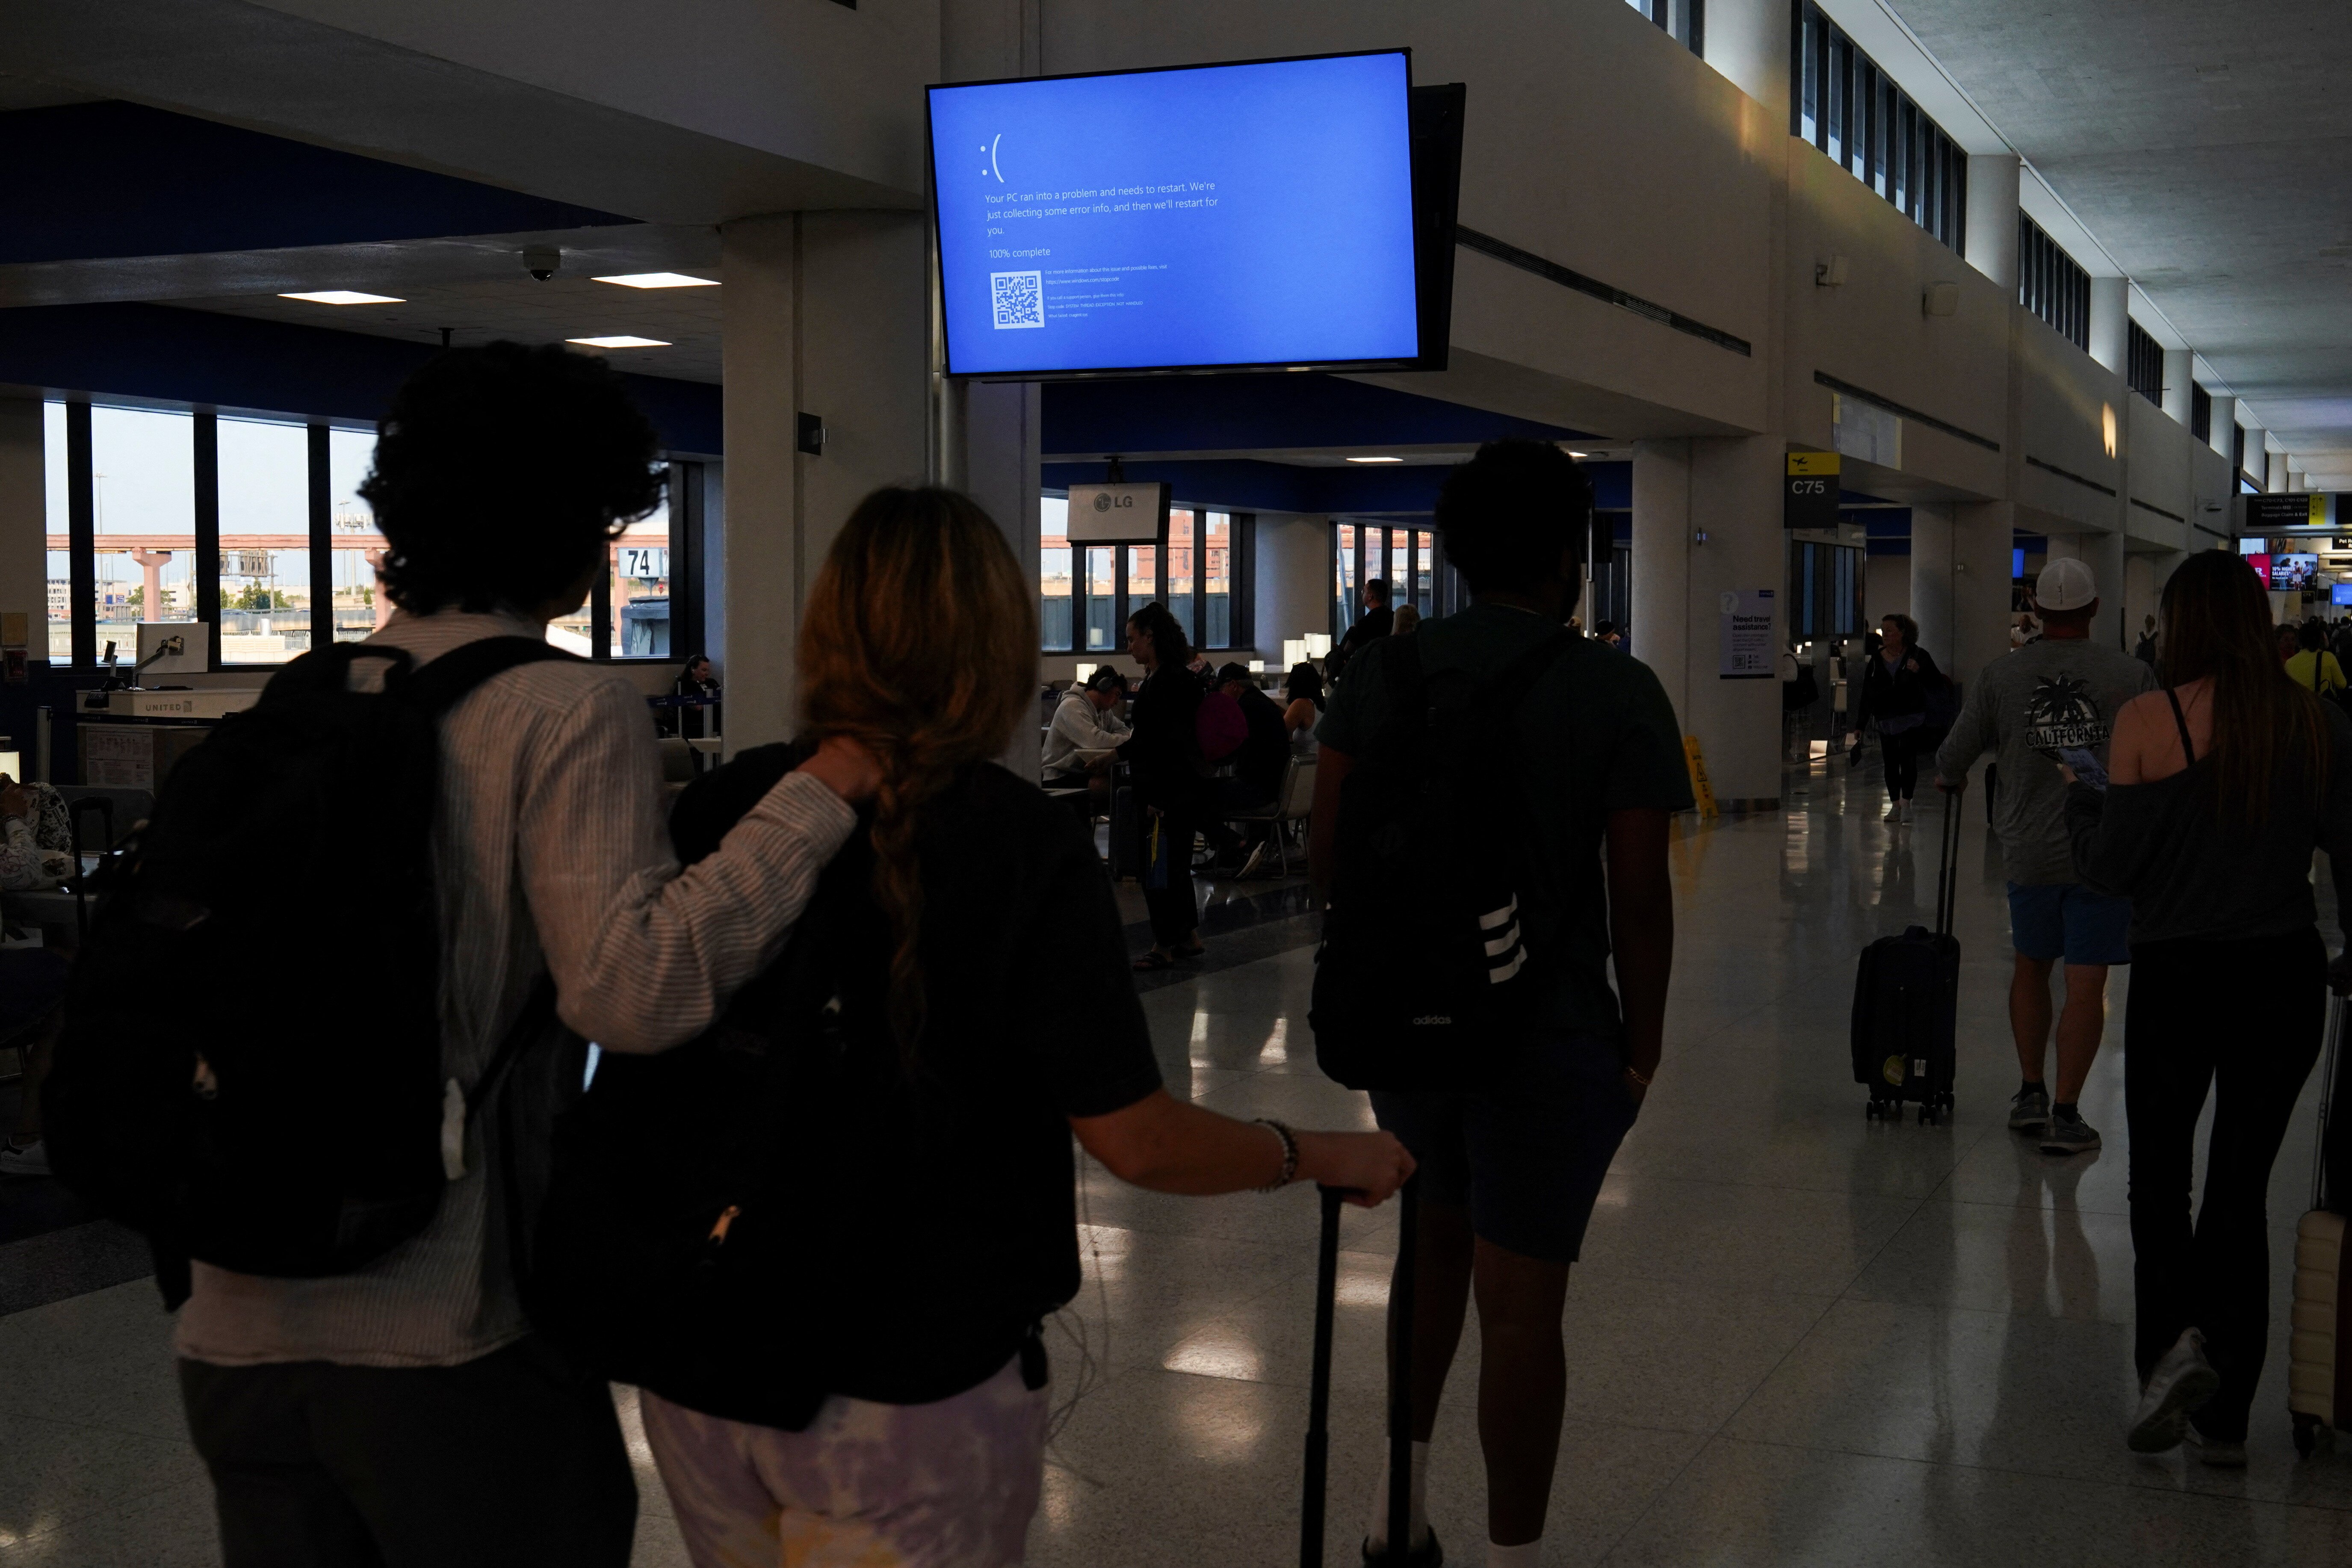 Travelers walk past a monitor displaying a blue error screen, also known as the “Blue Screen of Death” inside Terminal C in Newark International Airport, after United Airlines and other airlines grounded flights due to a worldwide tech outage caused by an update to Crowdstrike's 